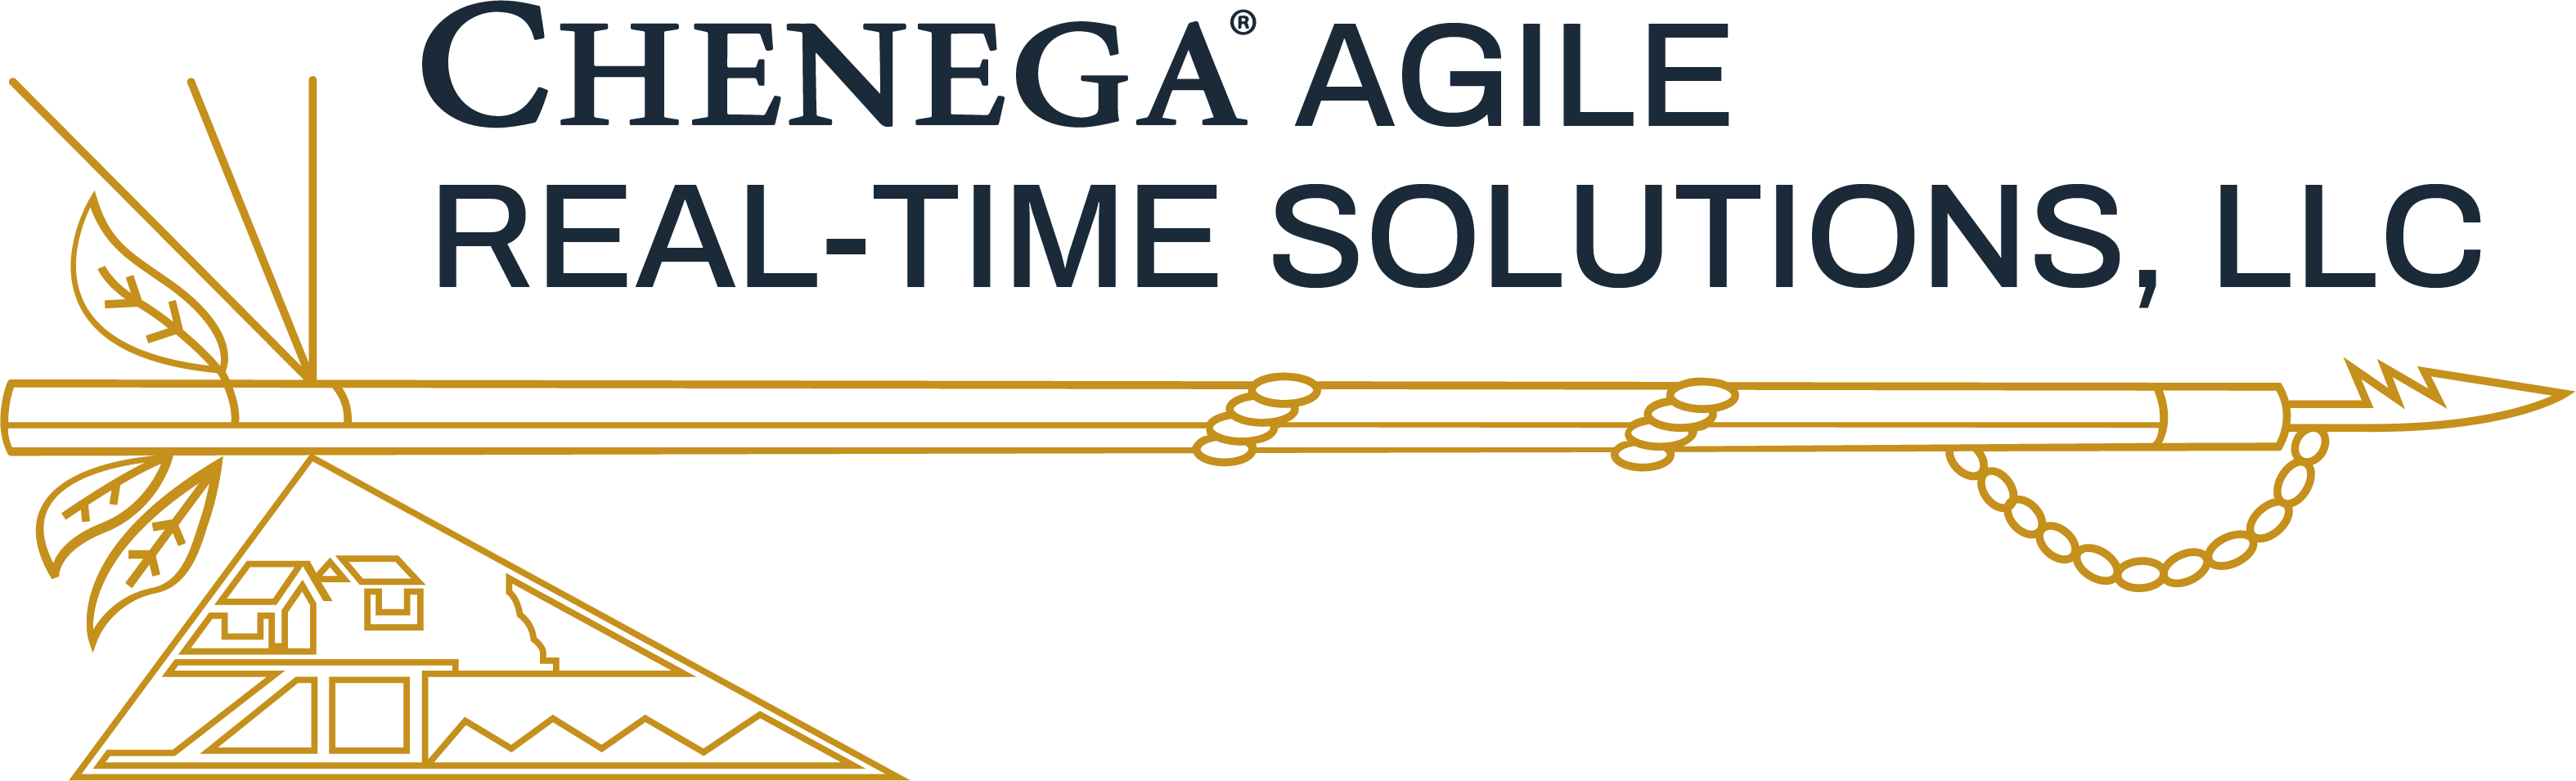 Chenega Agile Real-Time Solutions